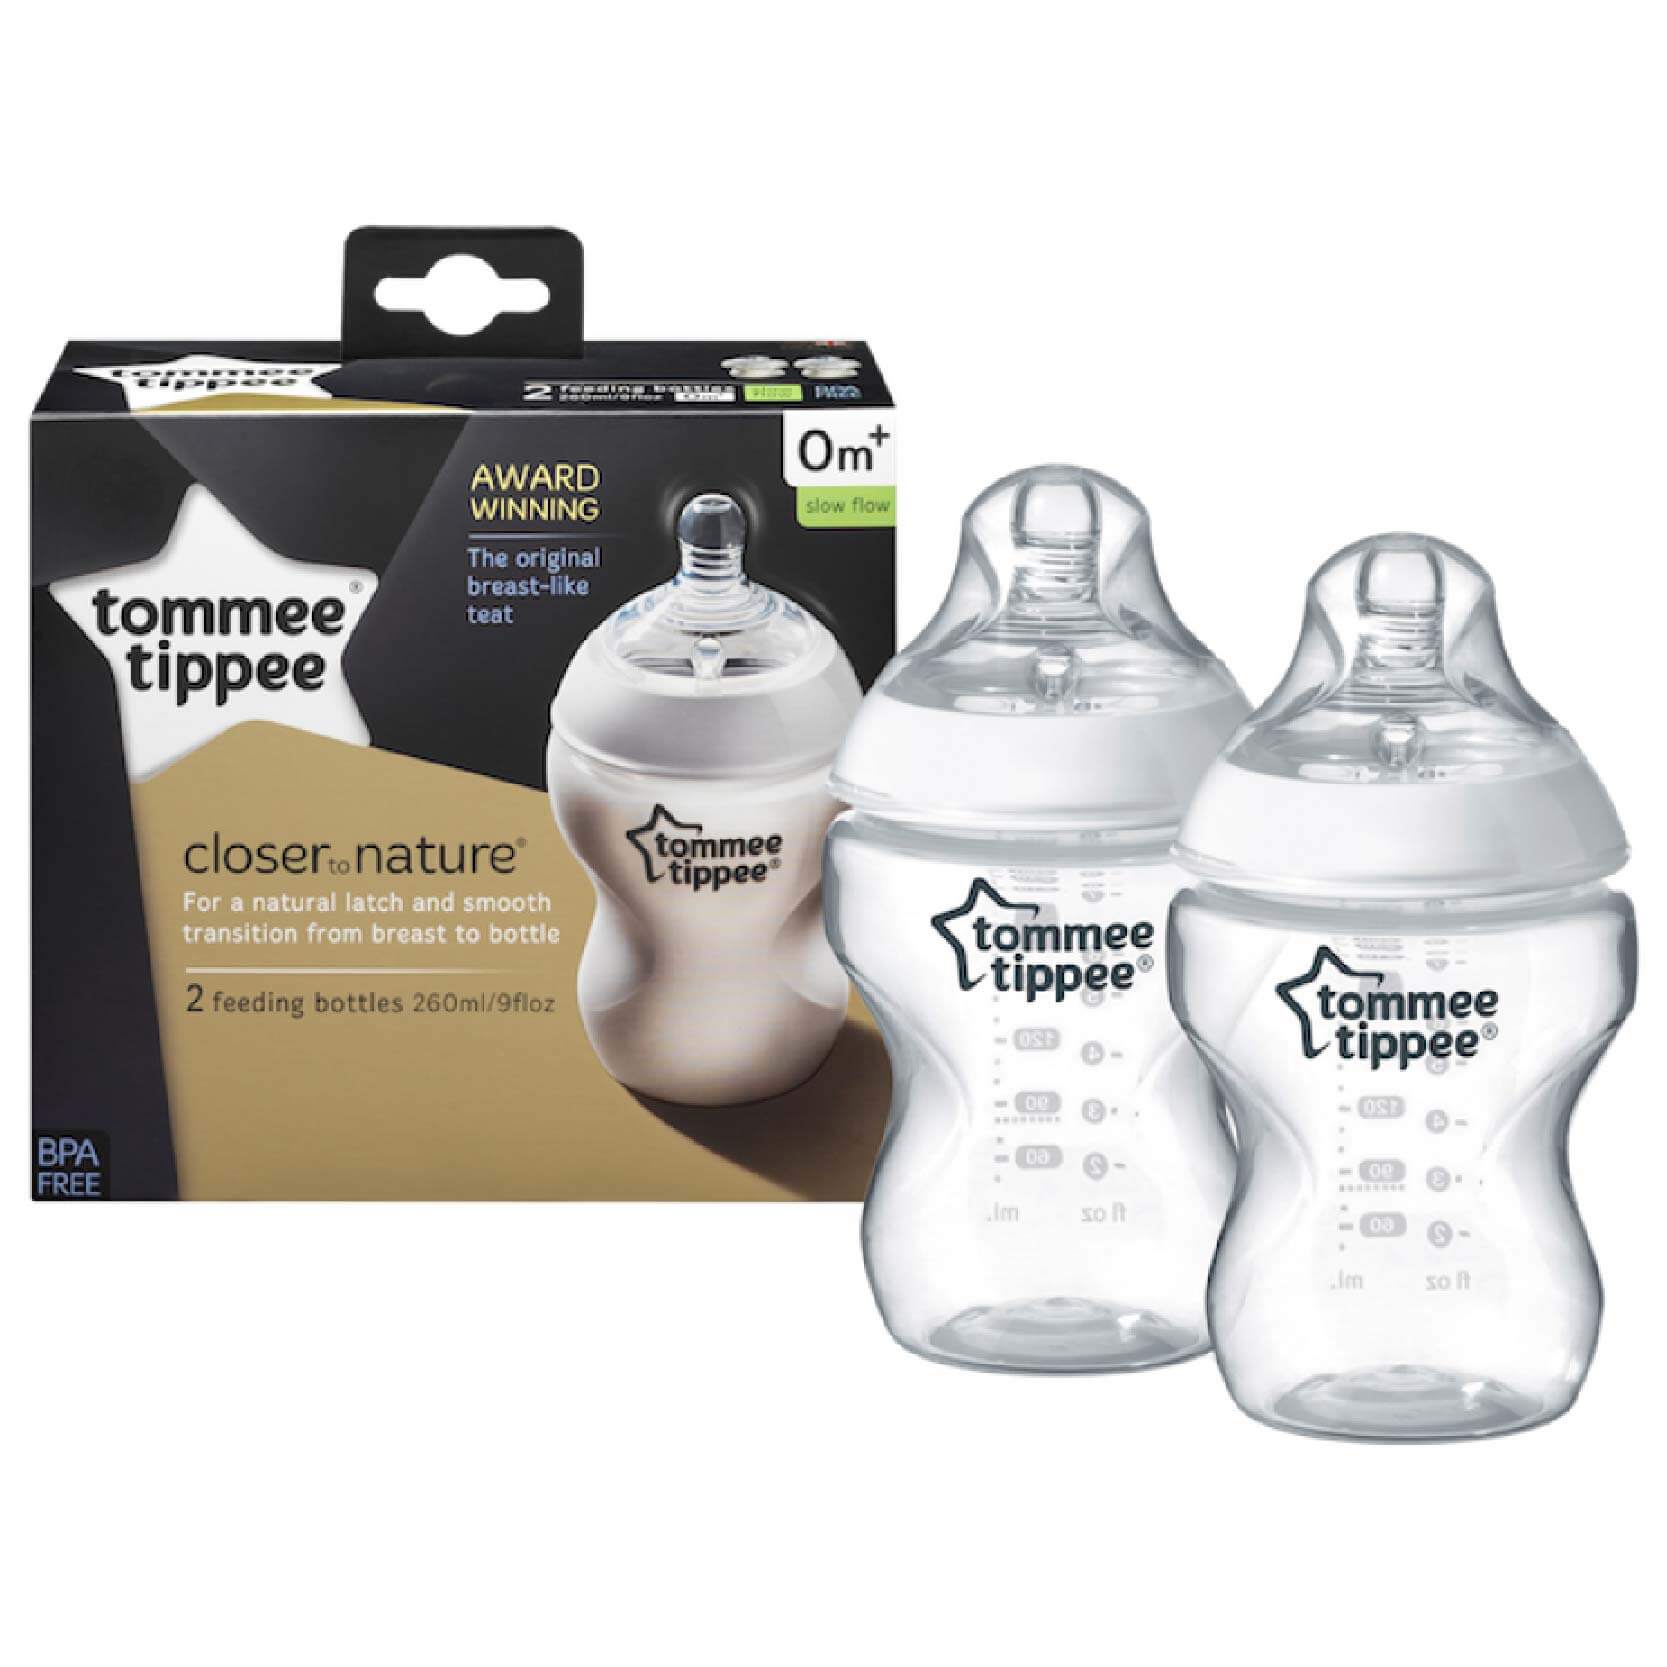 toddler basics - tommee tippee